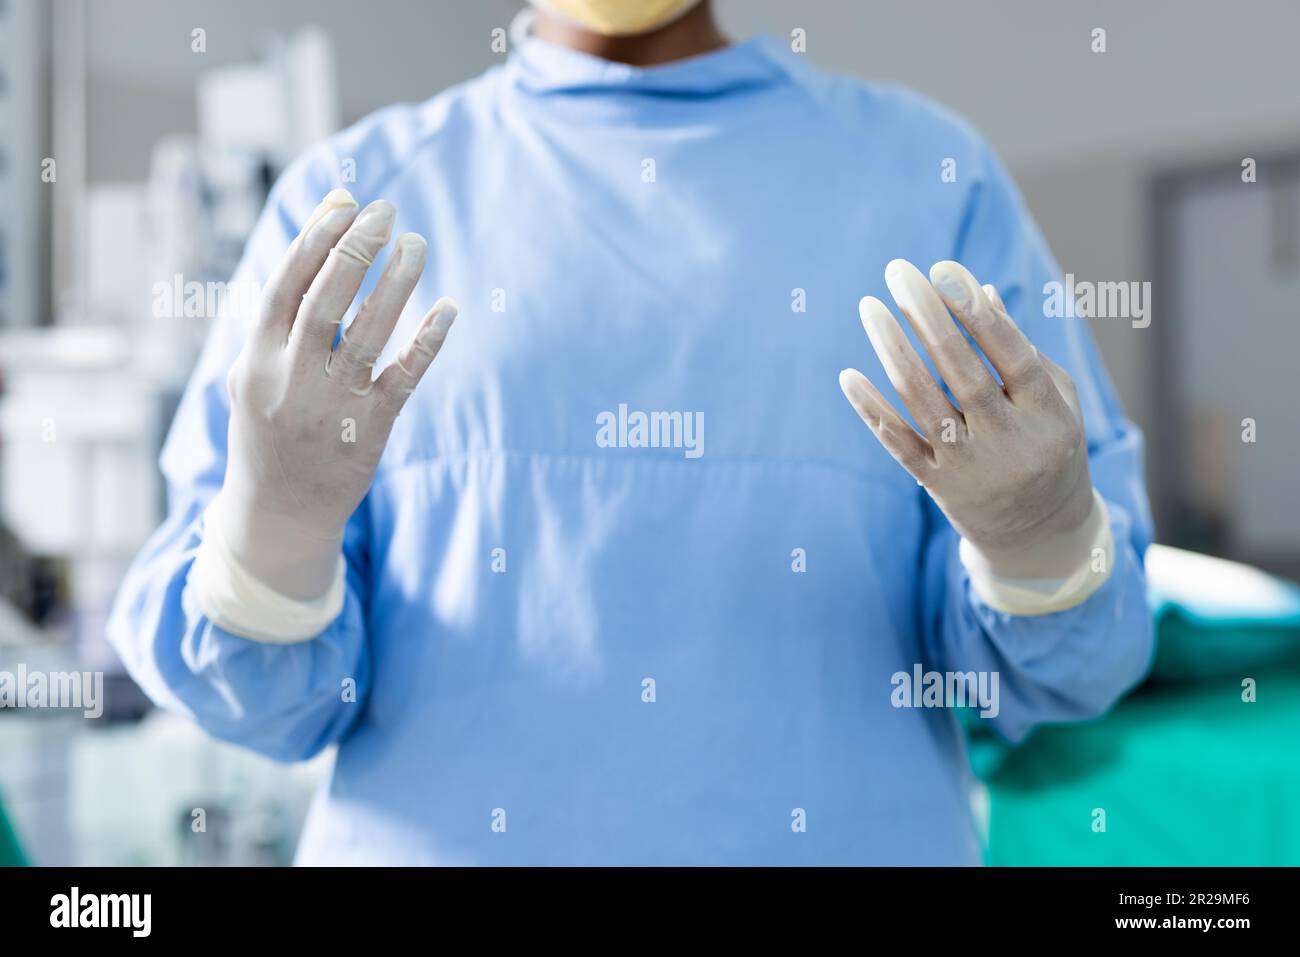 Midsection of surgeon wearing surgical gown and gloves in operating theatre Stock Photo